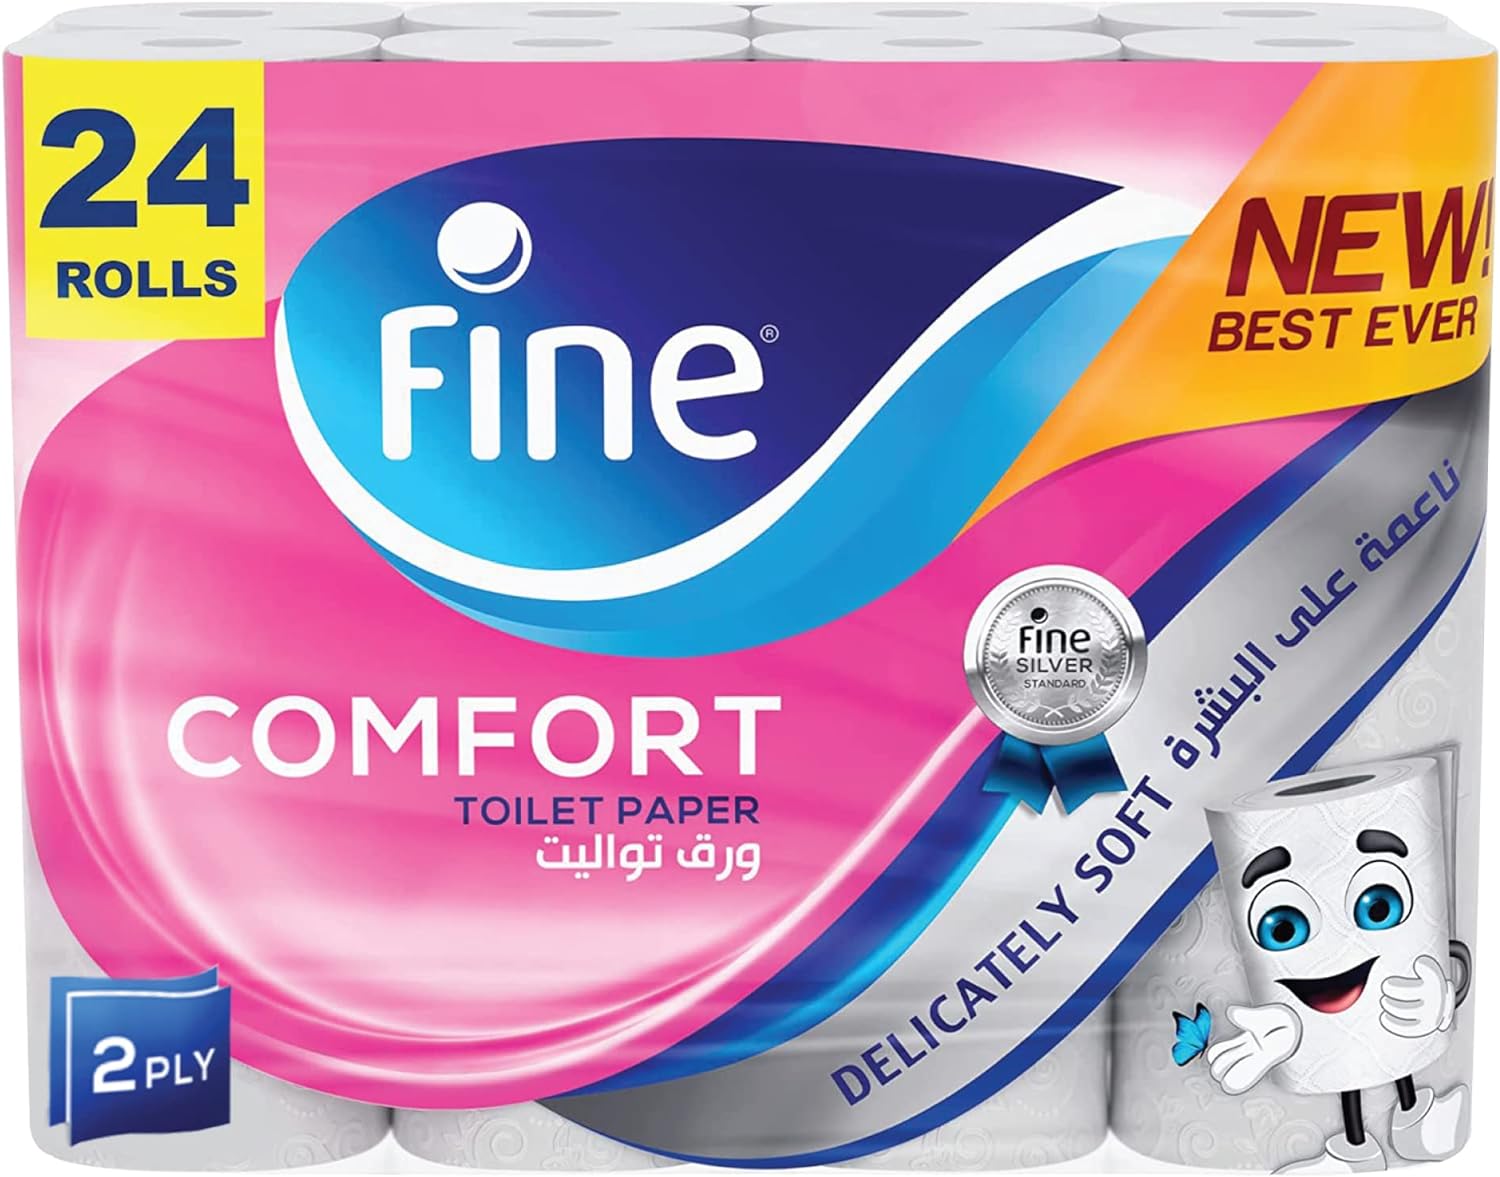 Fine Comfort, Absorbent, Sterilized, Soft, Flushable Toilet Paper, 2 Plies, Pack of 24 Rolls. New & Improved